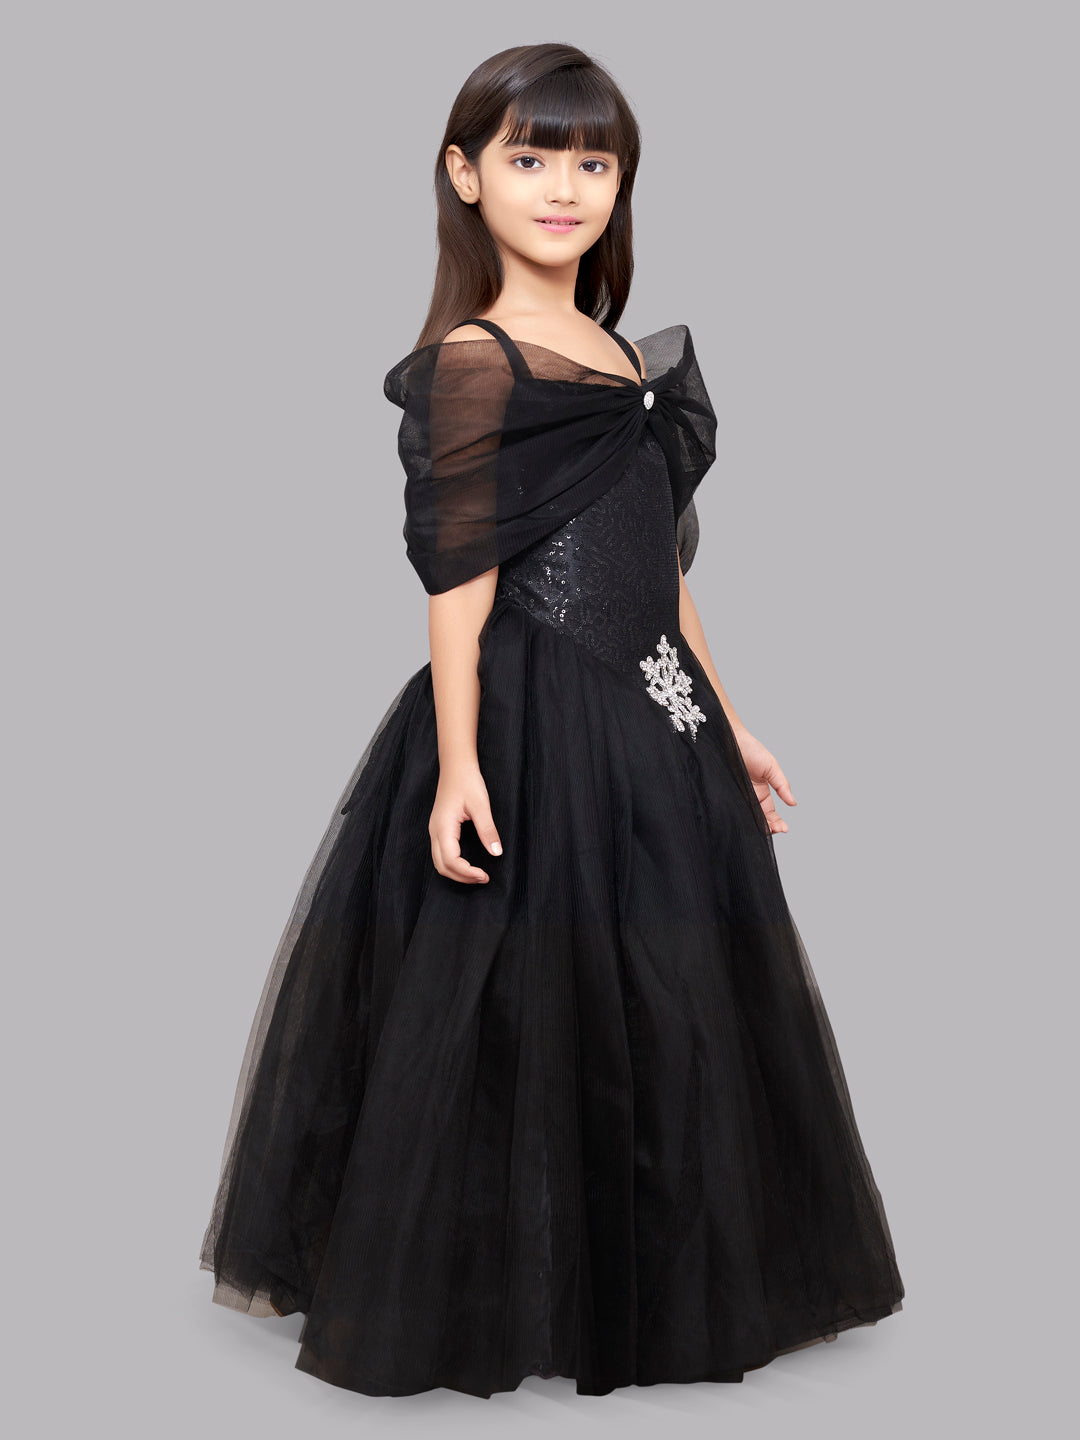 Buy GZCYL Black Girls Pageant Dresses High Low Lace Princess Ball Gown  Flower Girls Wedding Party Dress for Child 60 at Amazon.in